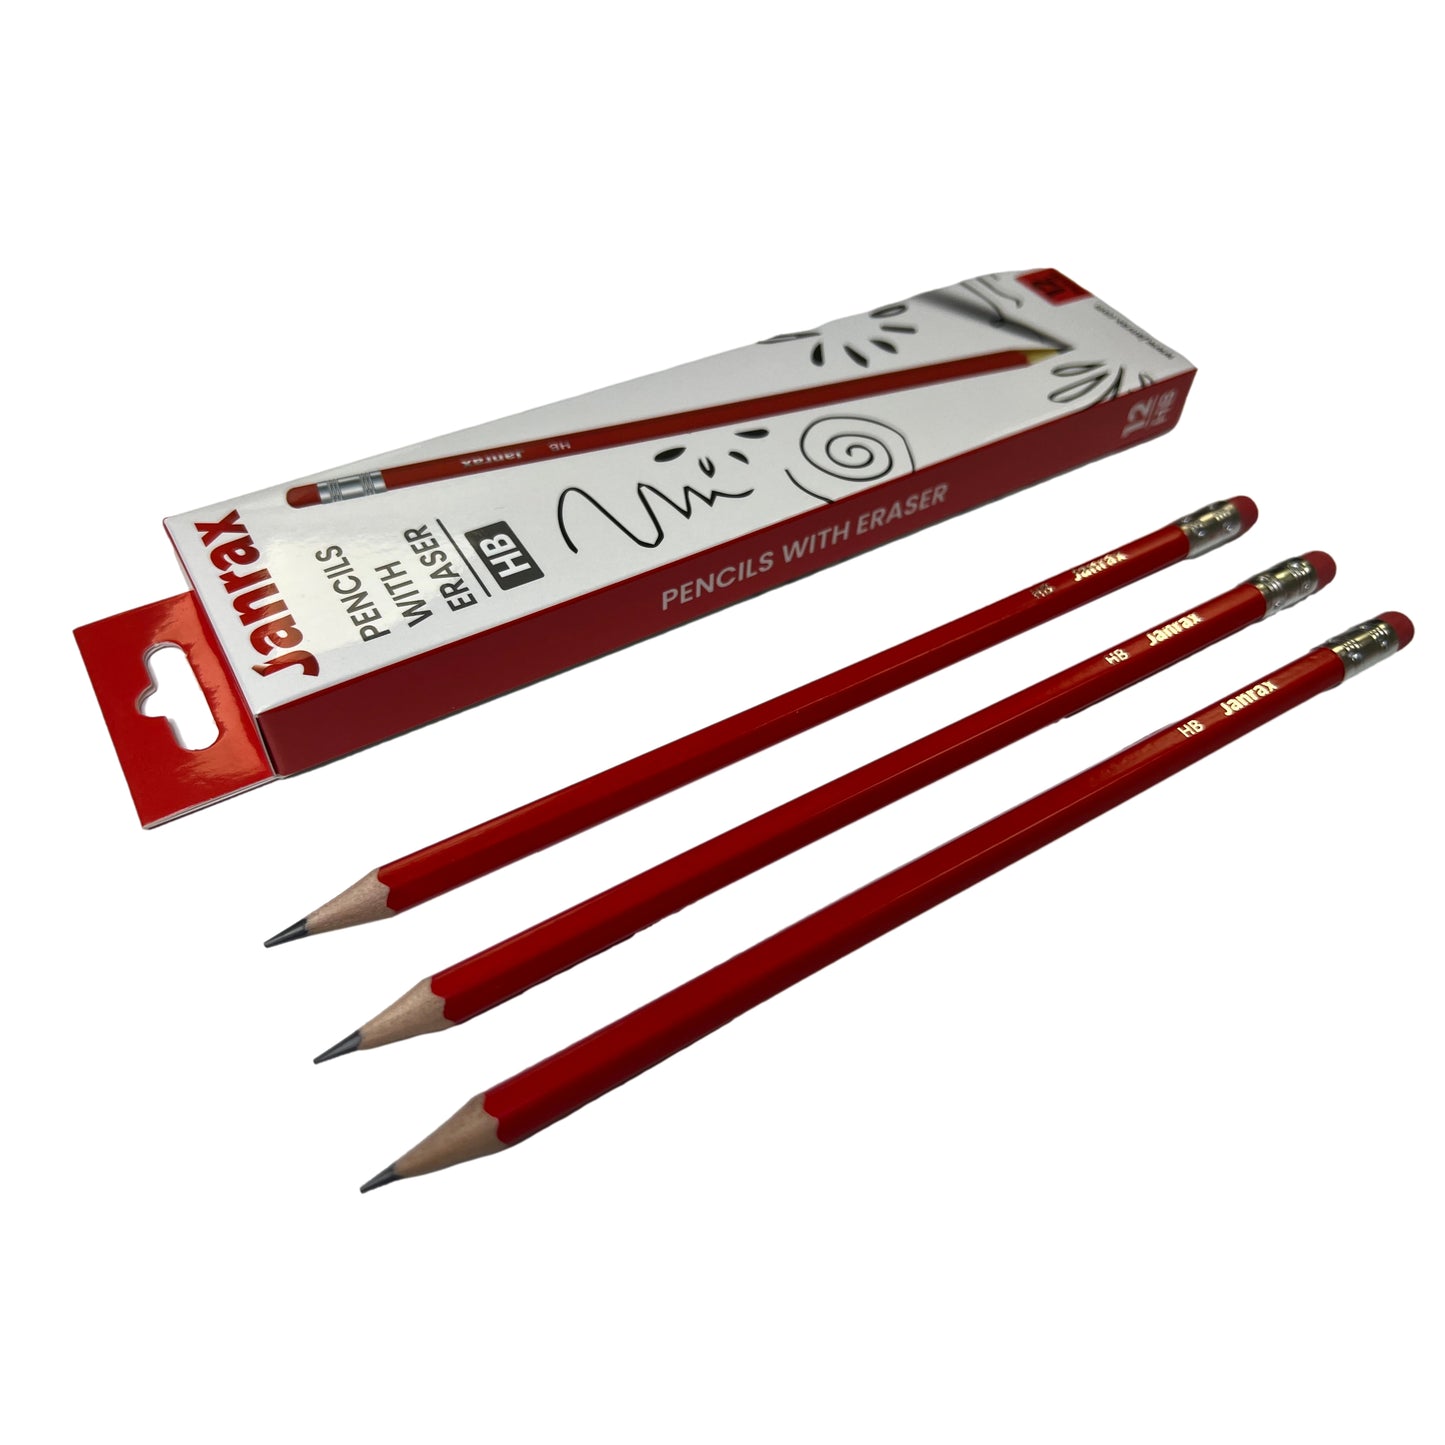 Pack of 12 Janrax HB Pencils with Erasers